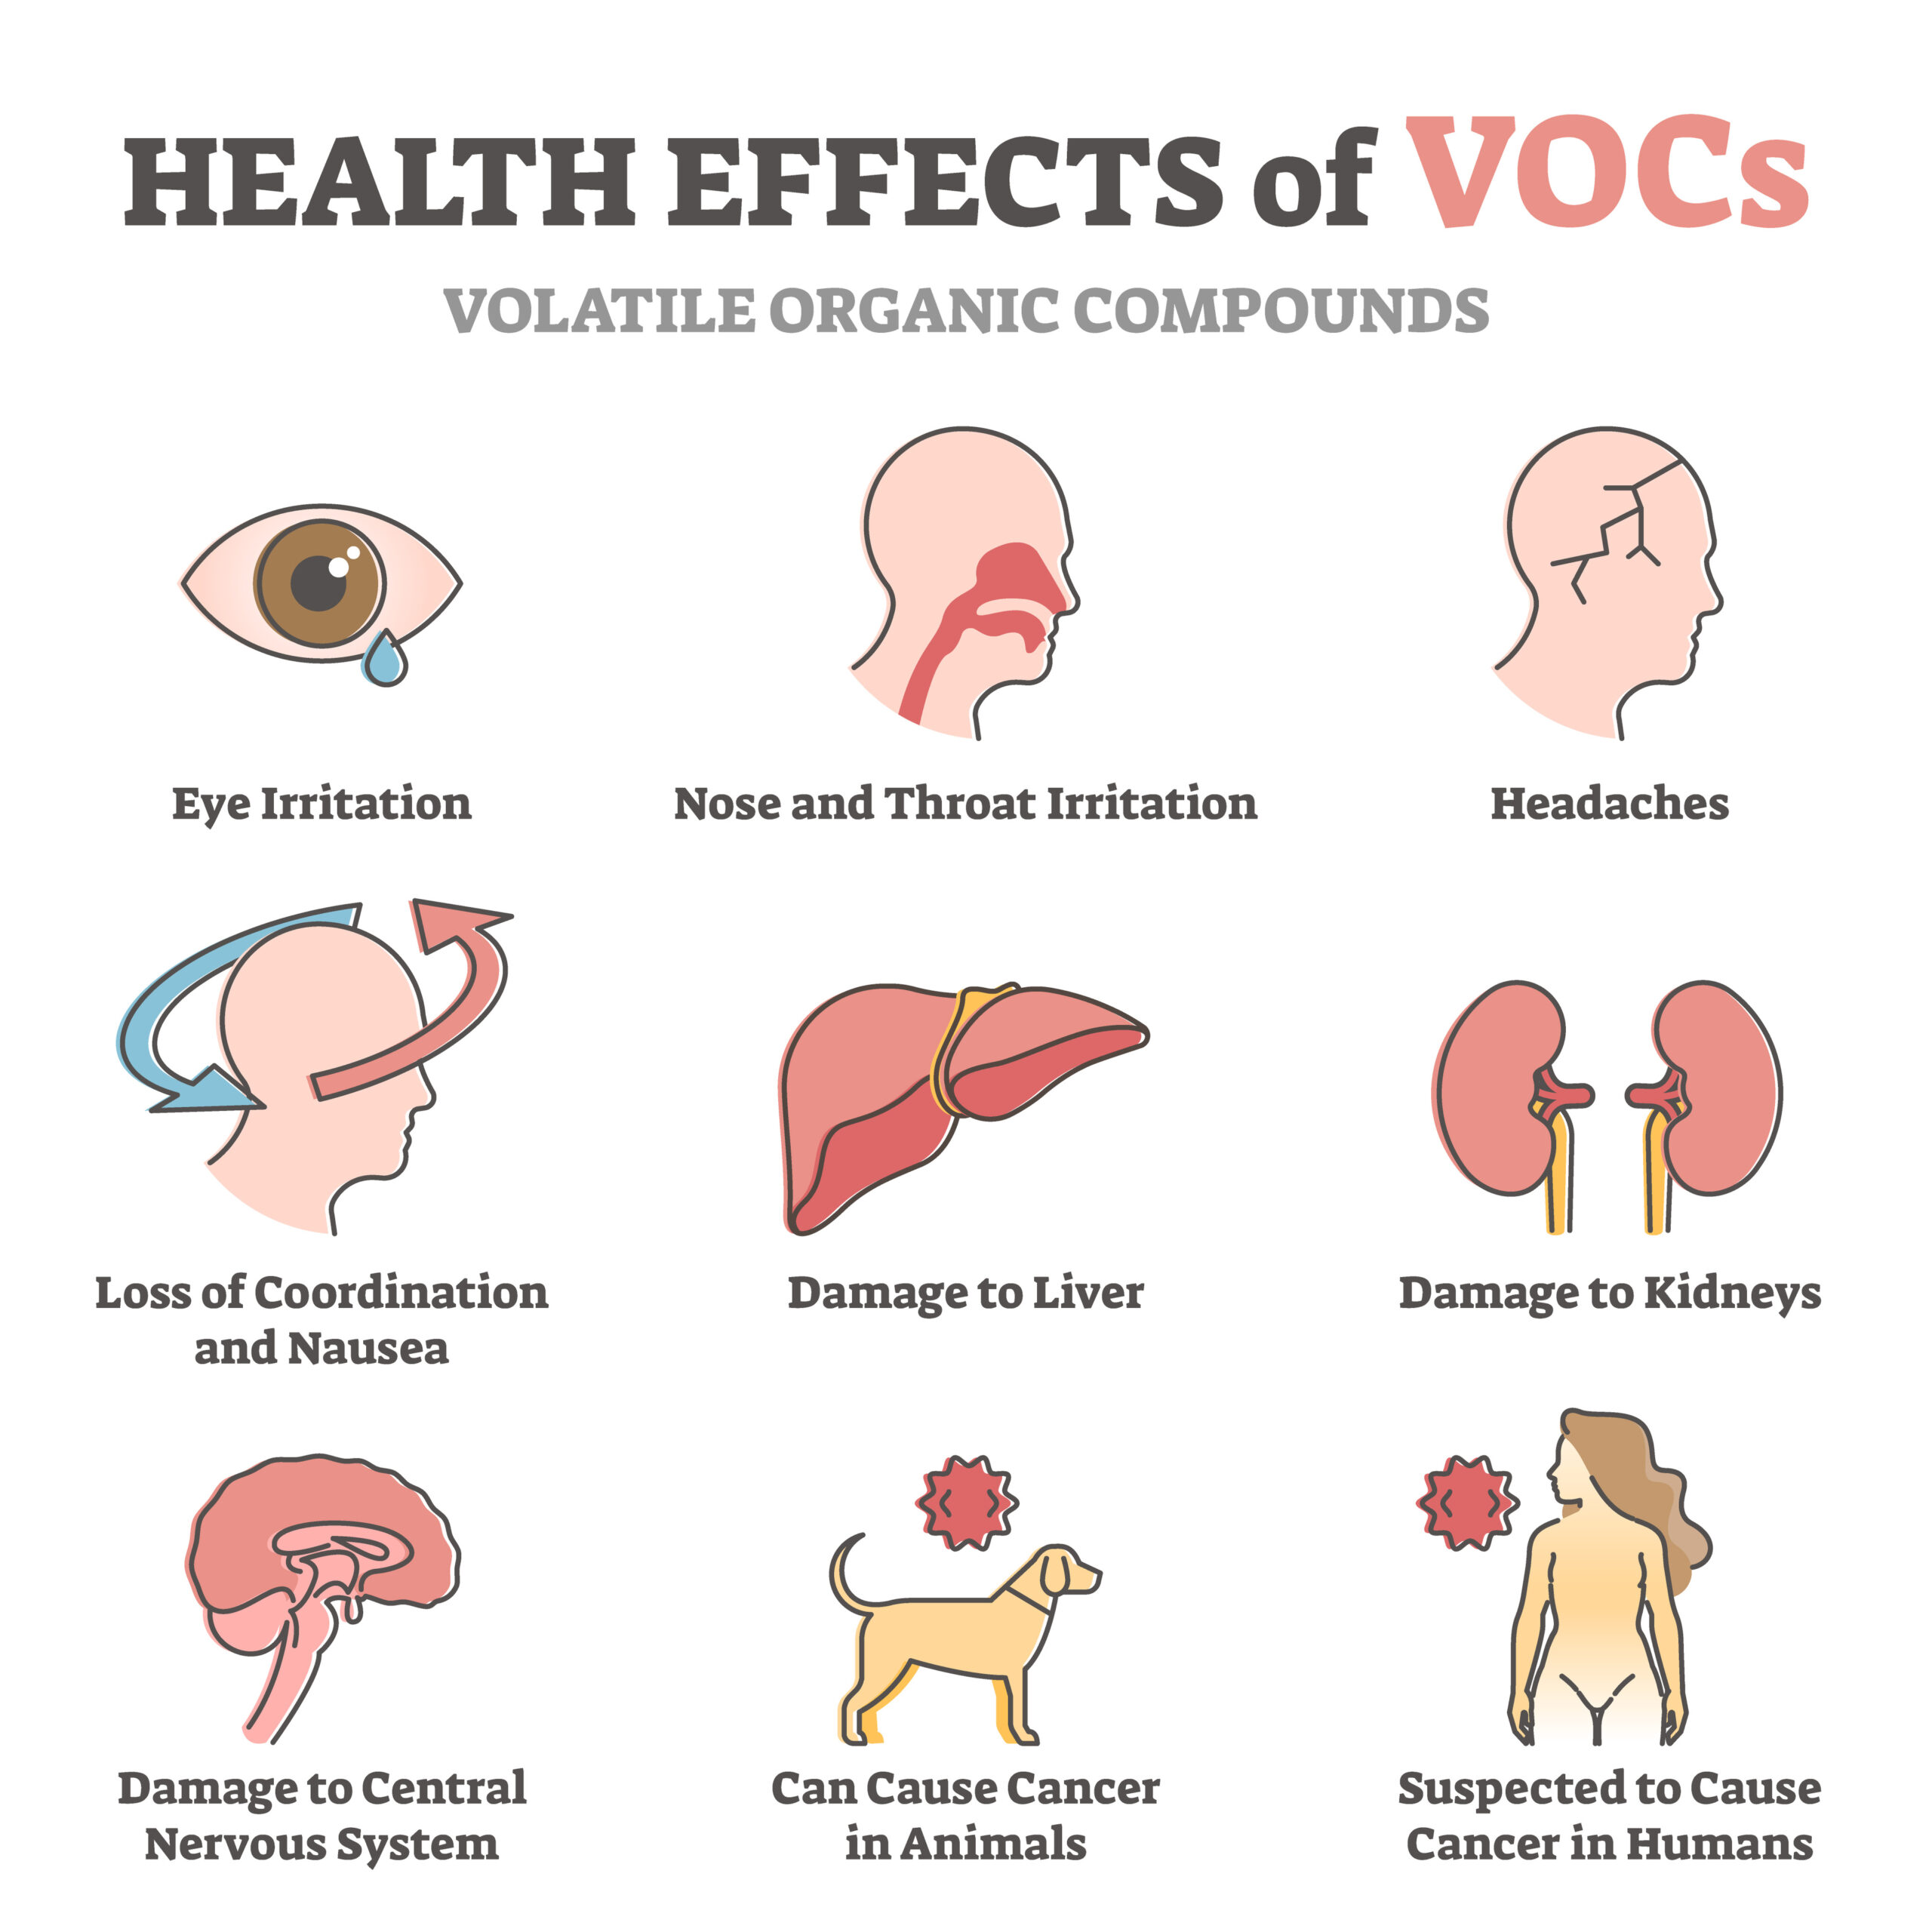 VOCs health effects and air toxic pollution hazard to organs outline diagram